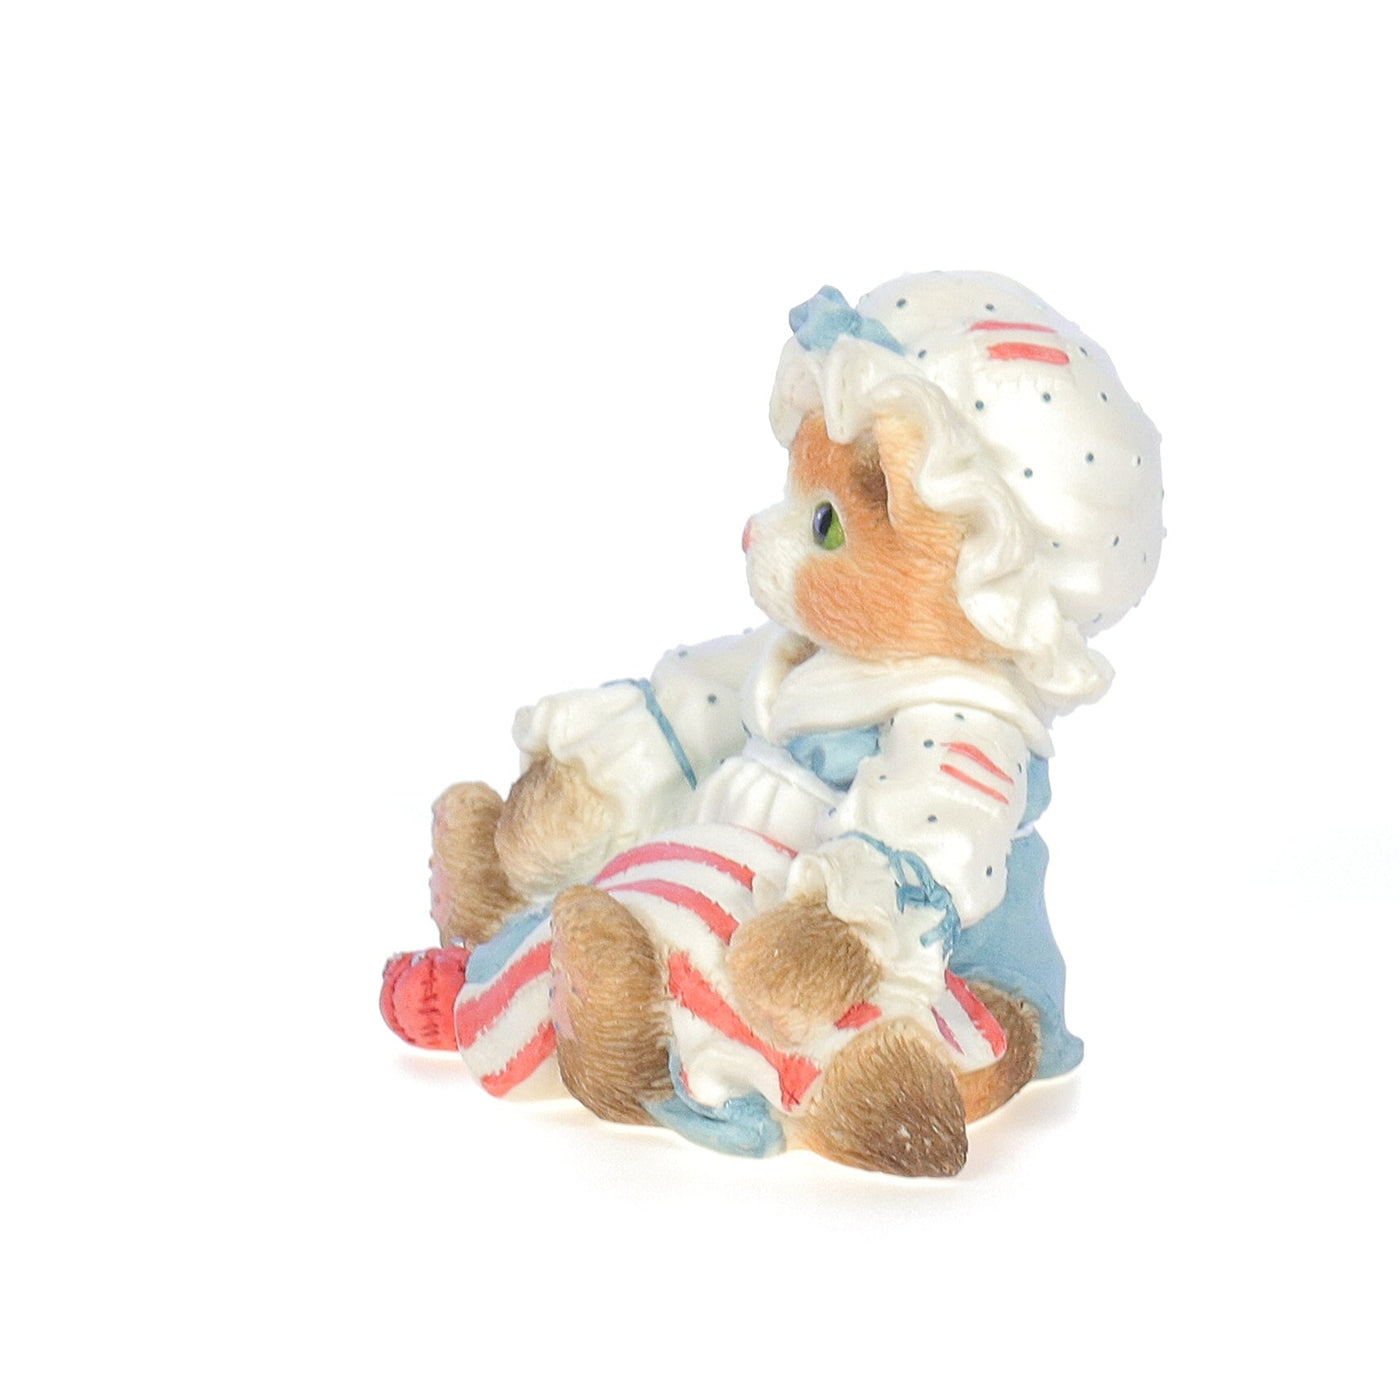 Calico_Kittens_Youre_My_All_American_Friend_Patriotic_Figurine_1994